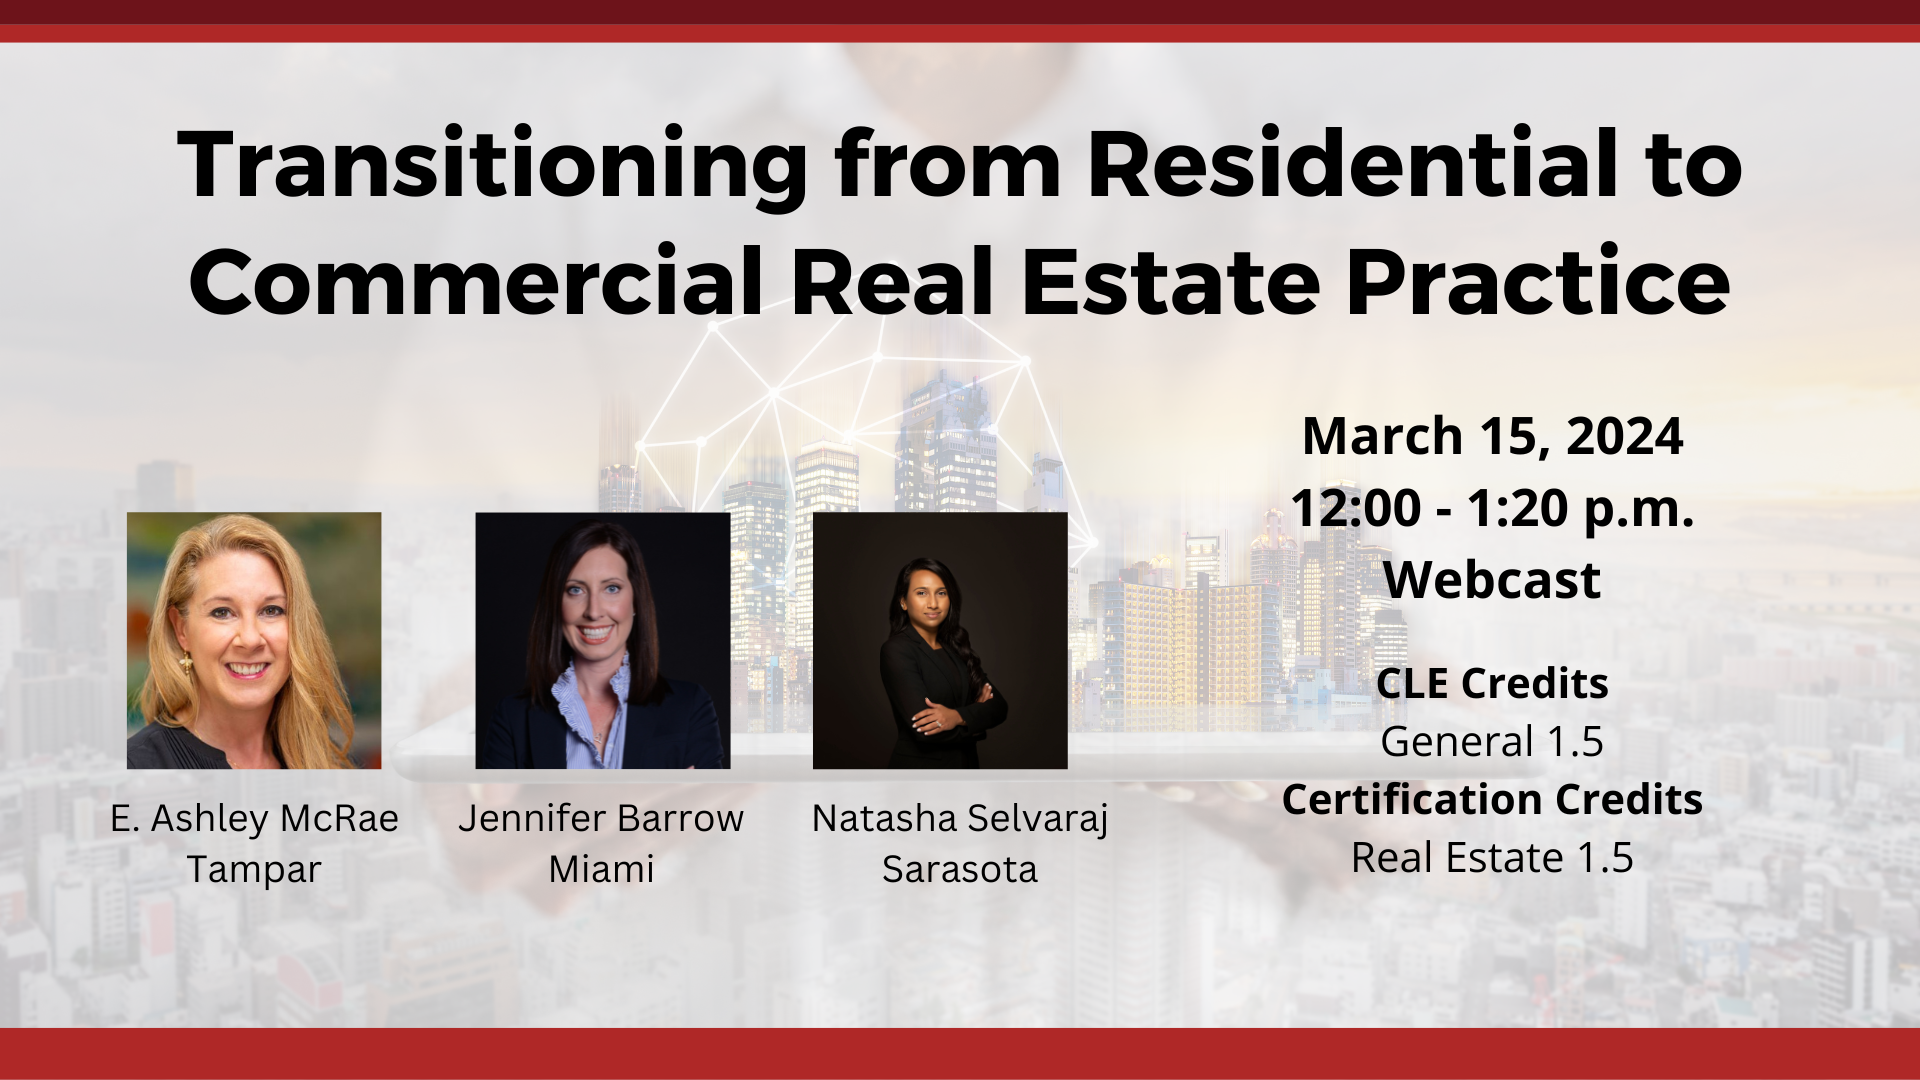 Transitioning from Residential to Commercial Real Estate Practice